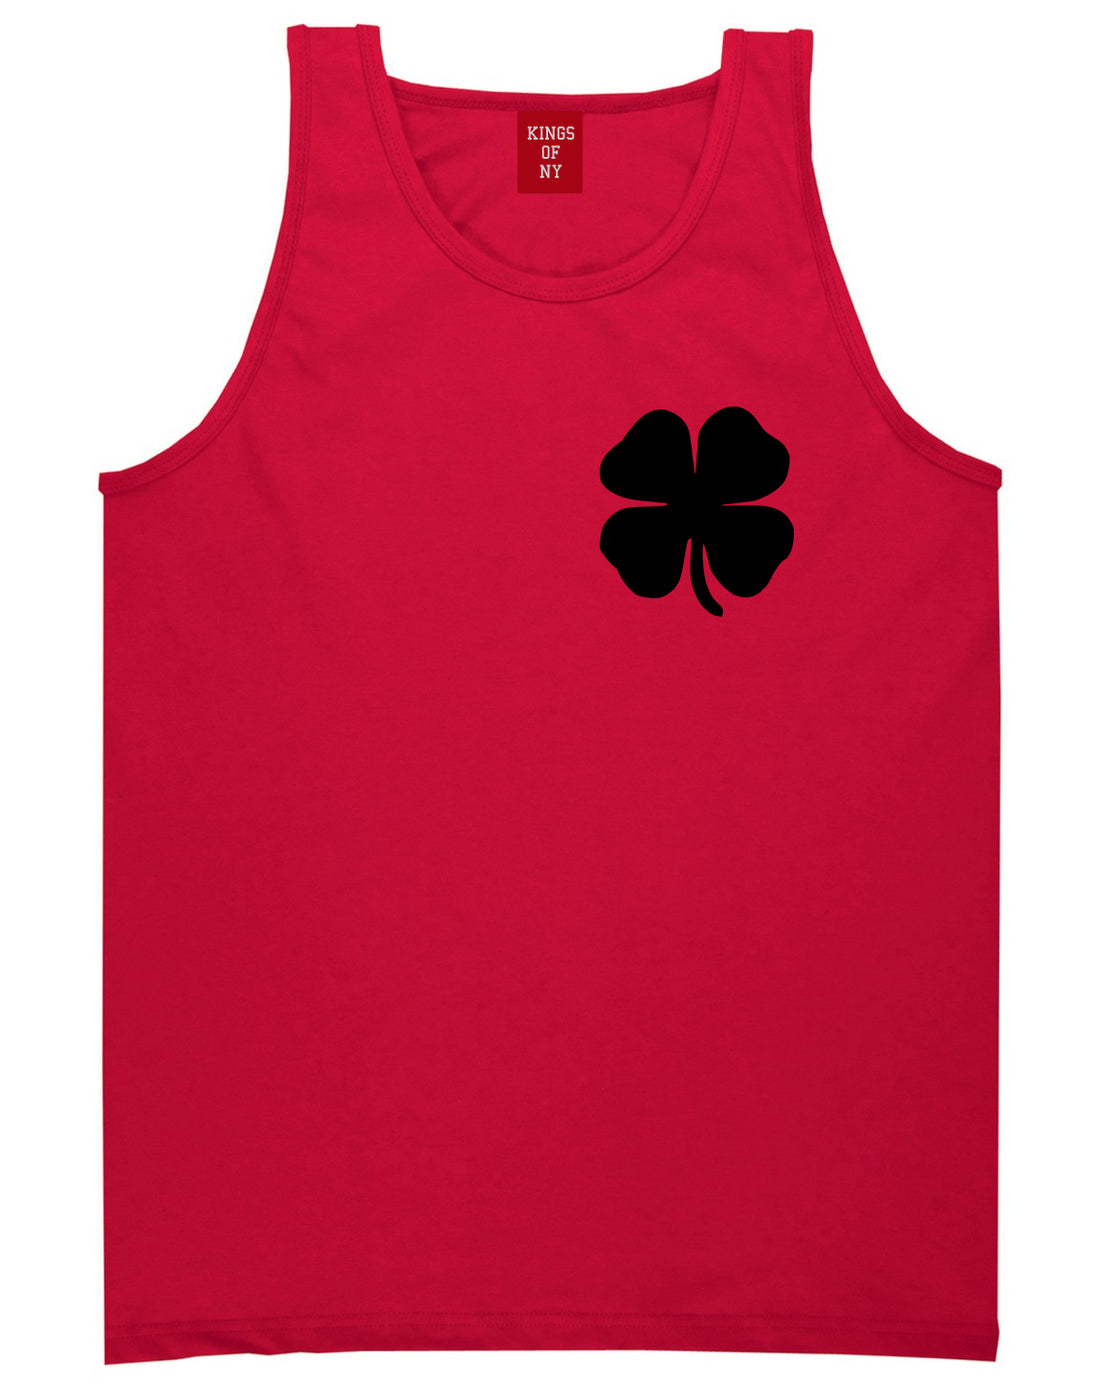 Four Leaf Clover Chest Red Tank Top Shirt by Kings Of NY